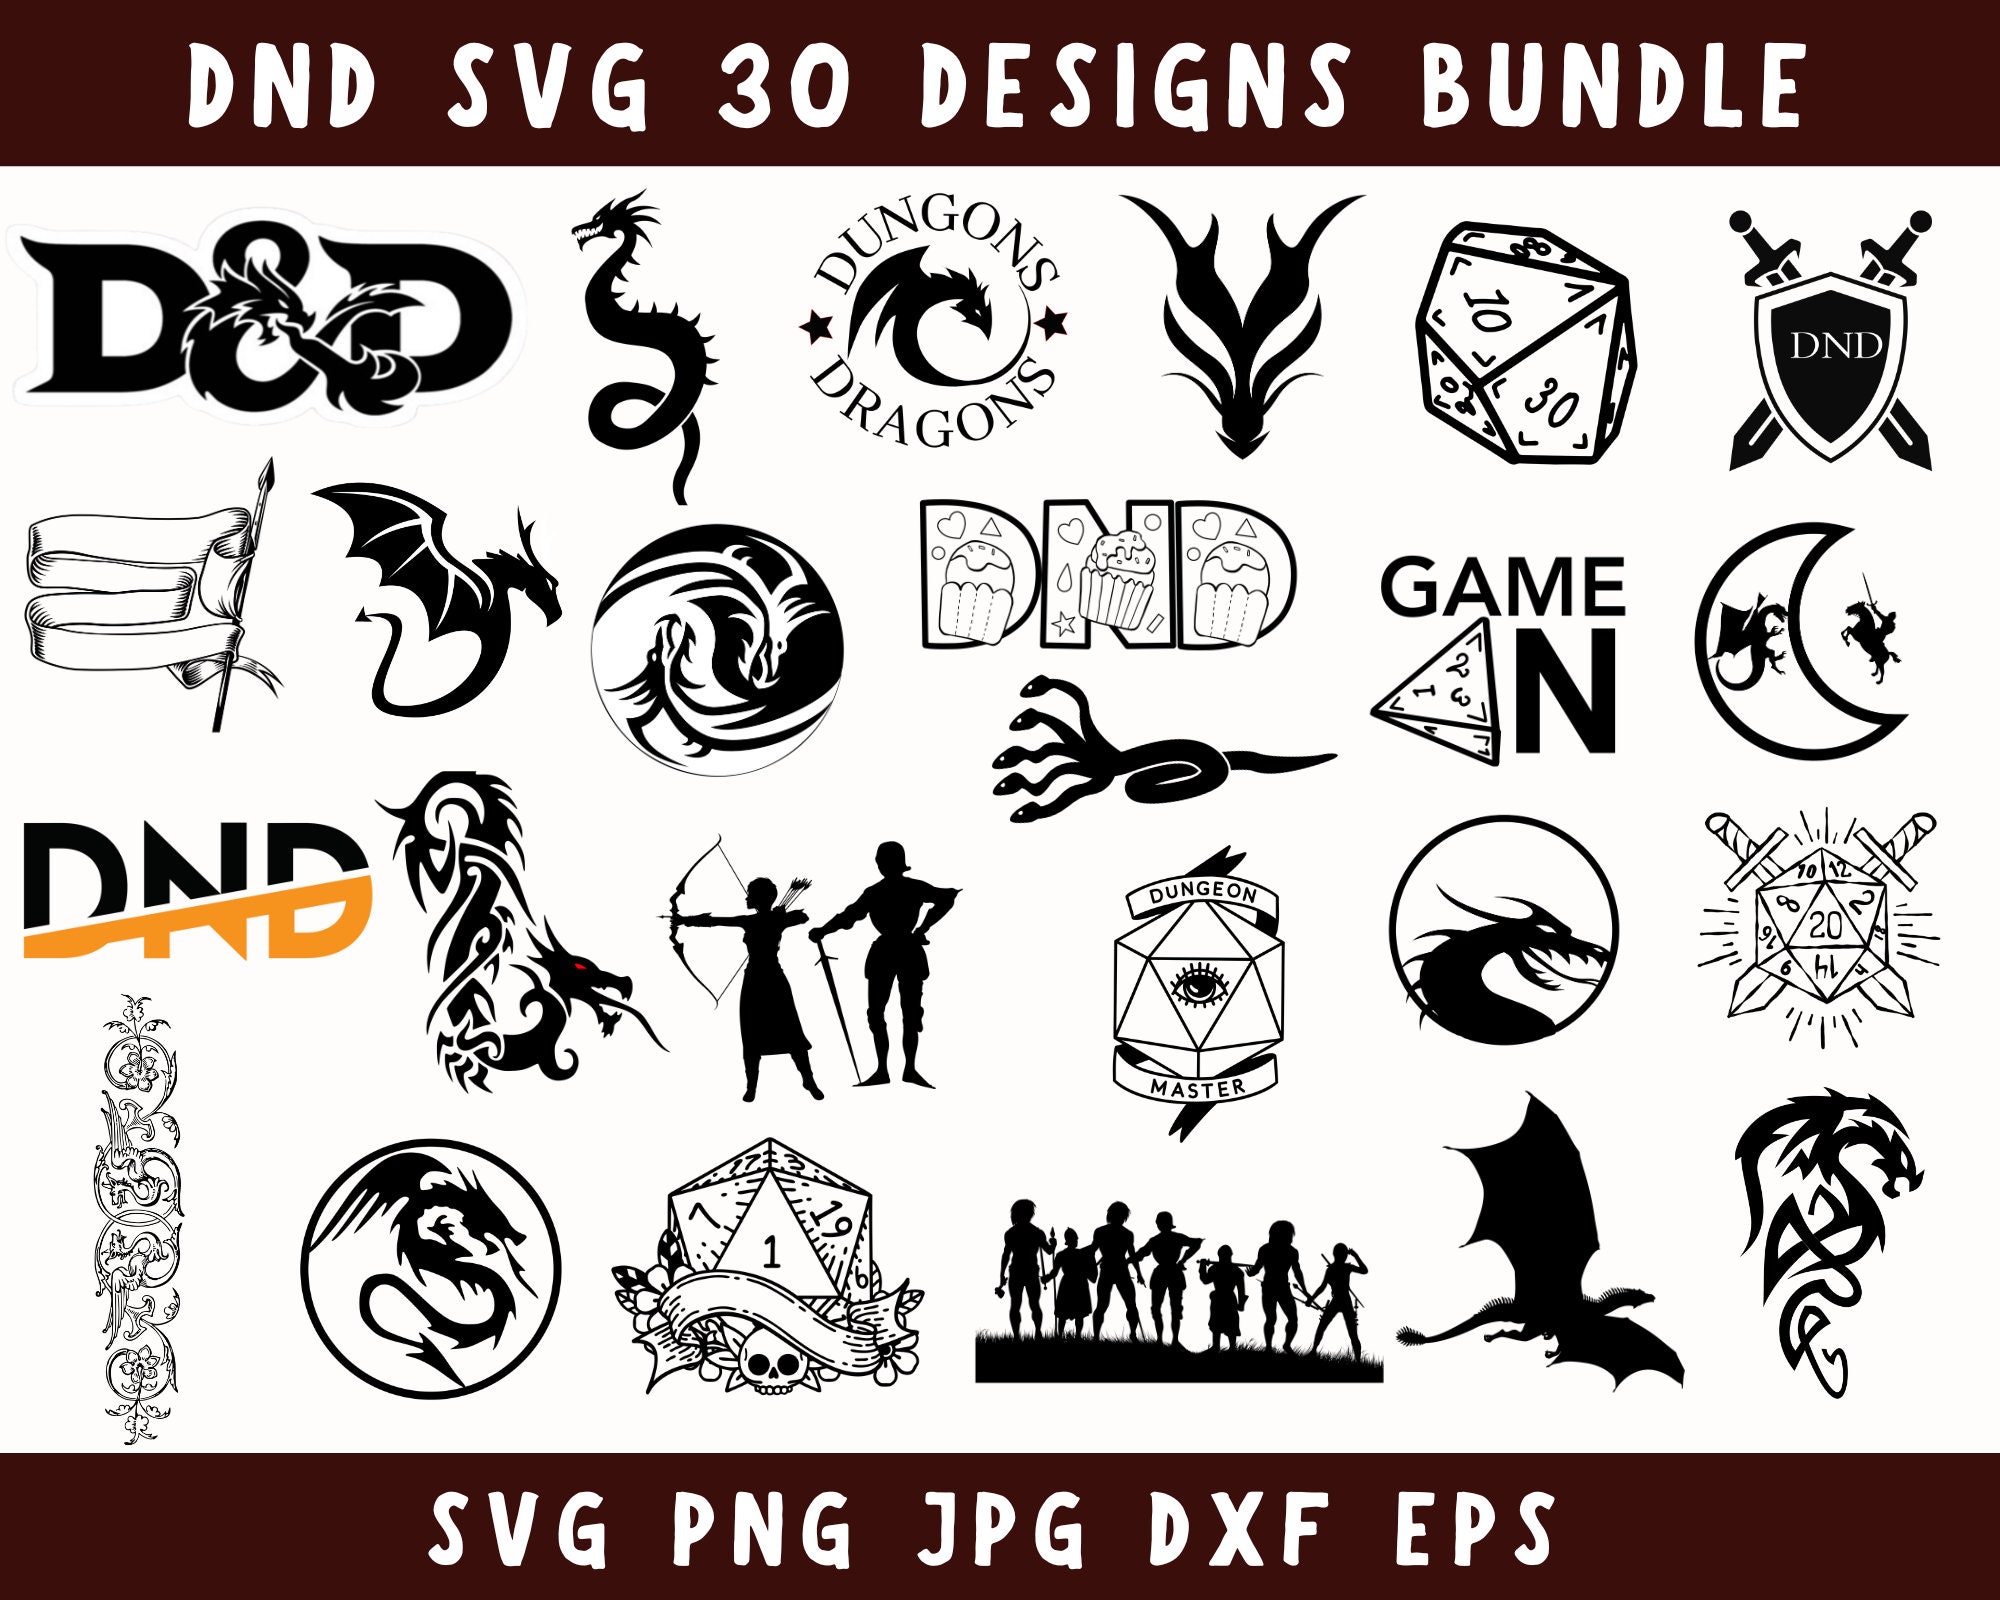 Dnd Svg Dnd Png Dragon Svg Dnd Clipart Dnd Stickers - Etsy UK